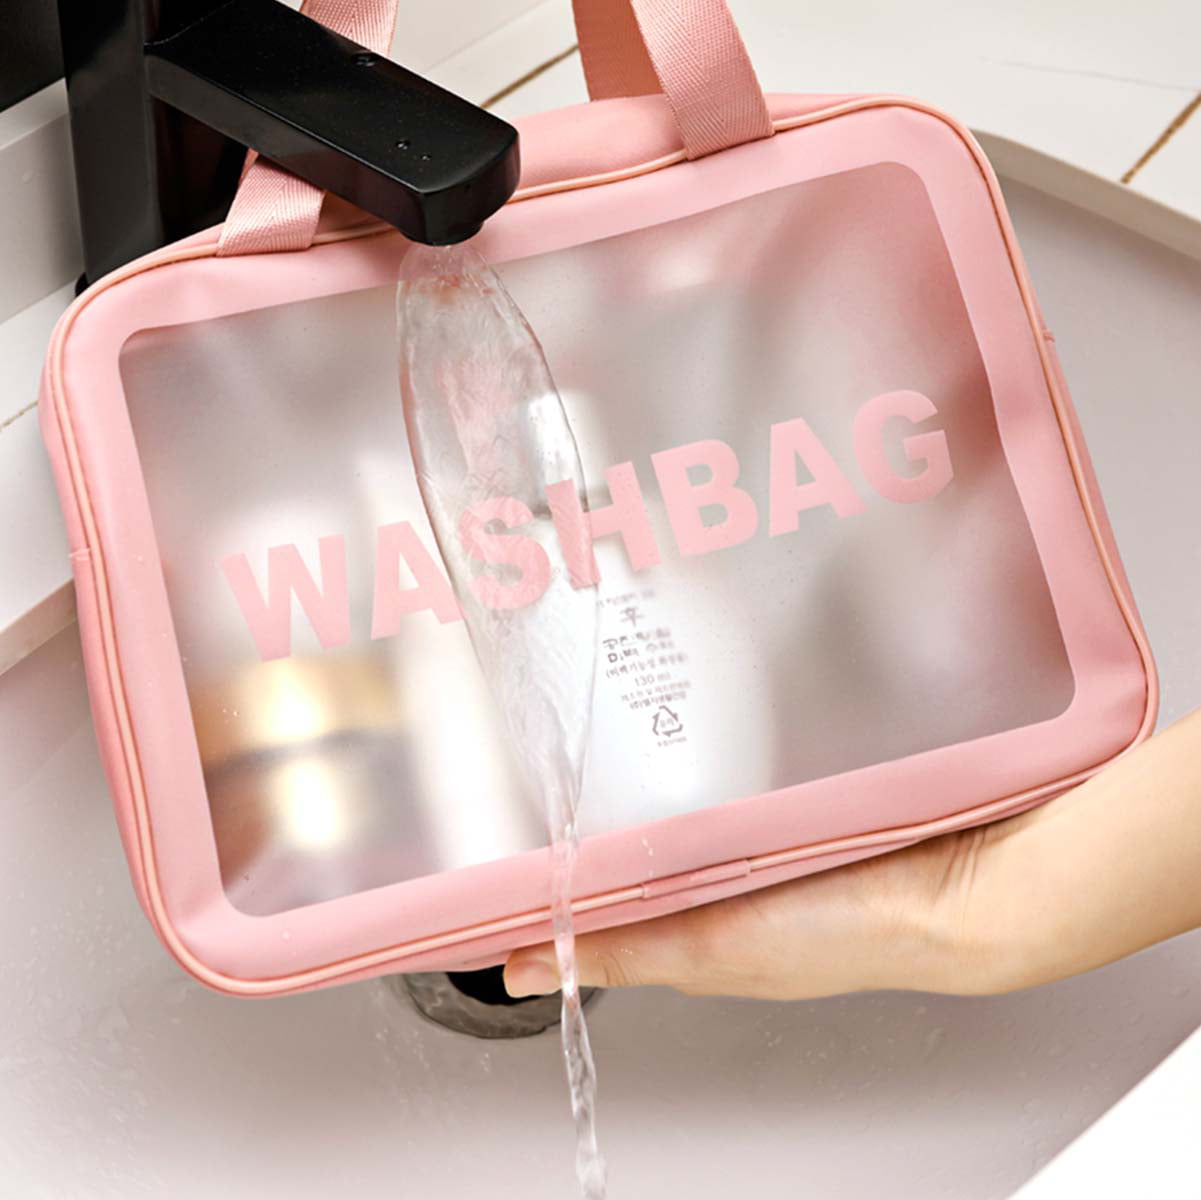 HYZFDD Wash Bag Travel,Travel Toiletry Bag,Travel Makeup Bag,Clear Toiletry  Bag,Translucent Waterproof and Draining Travel Toiletry Bag. (Pink M)